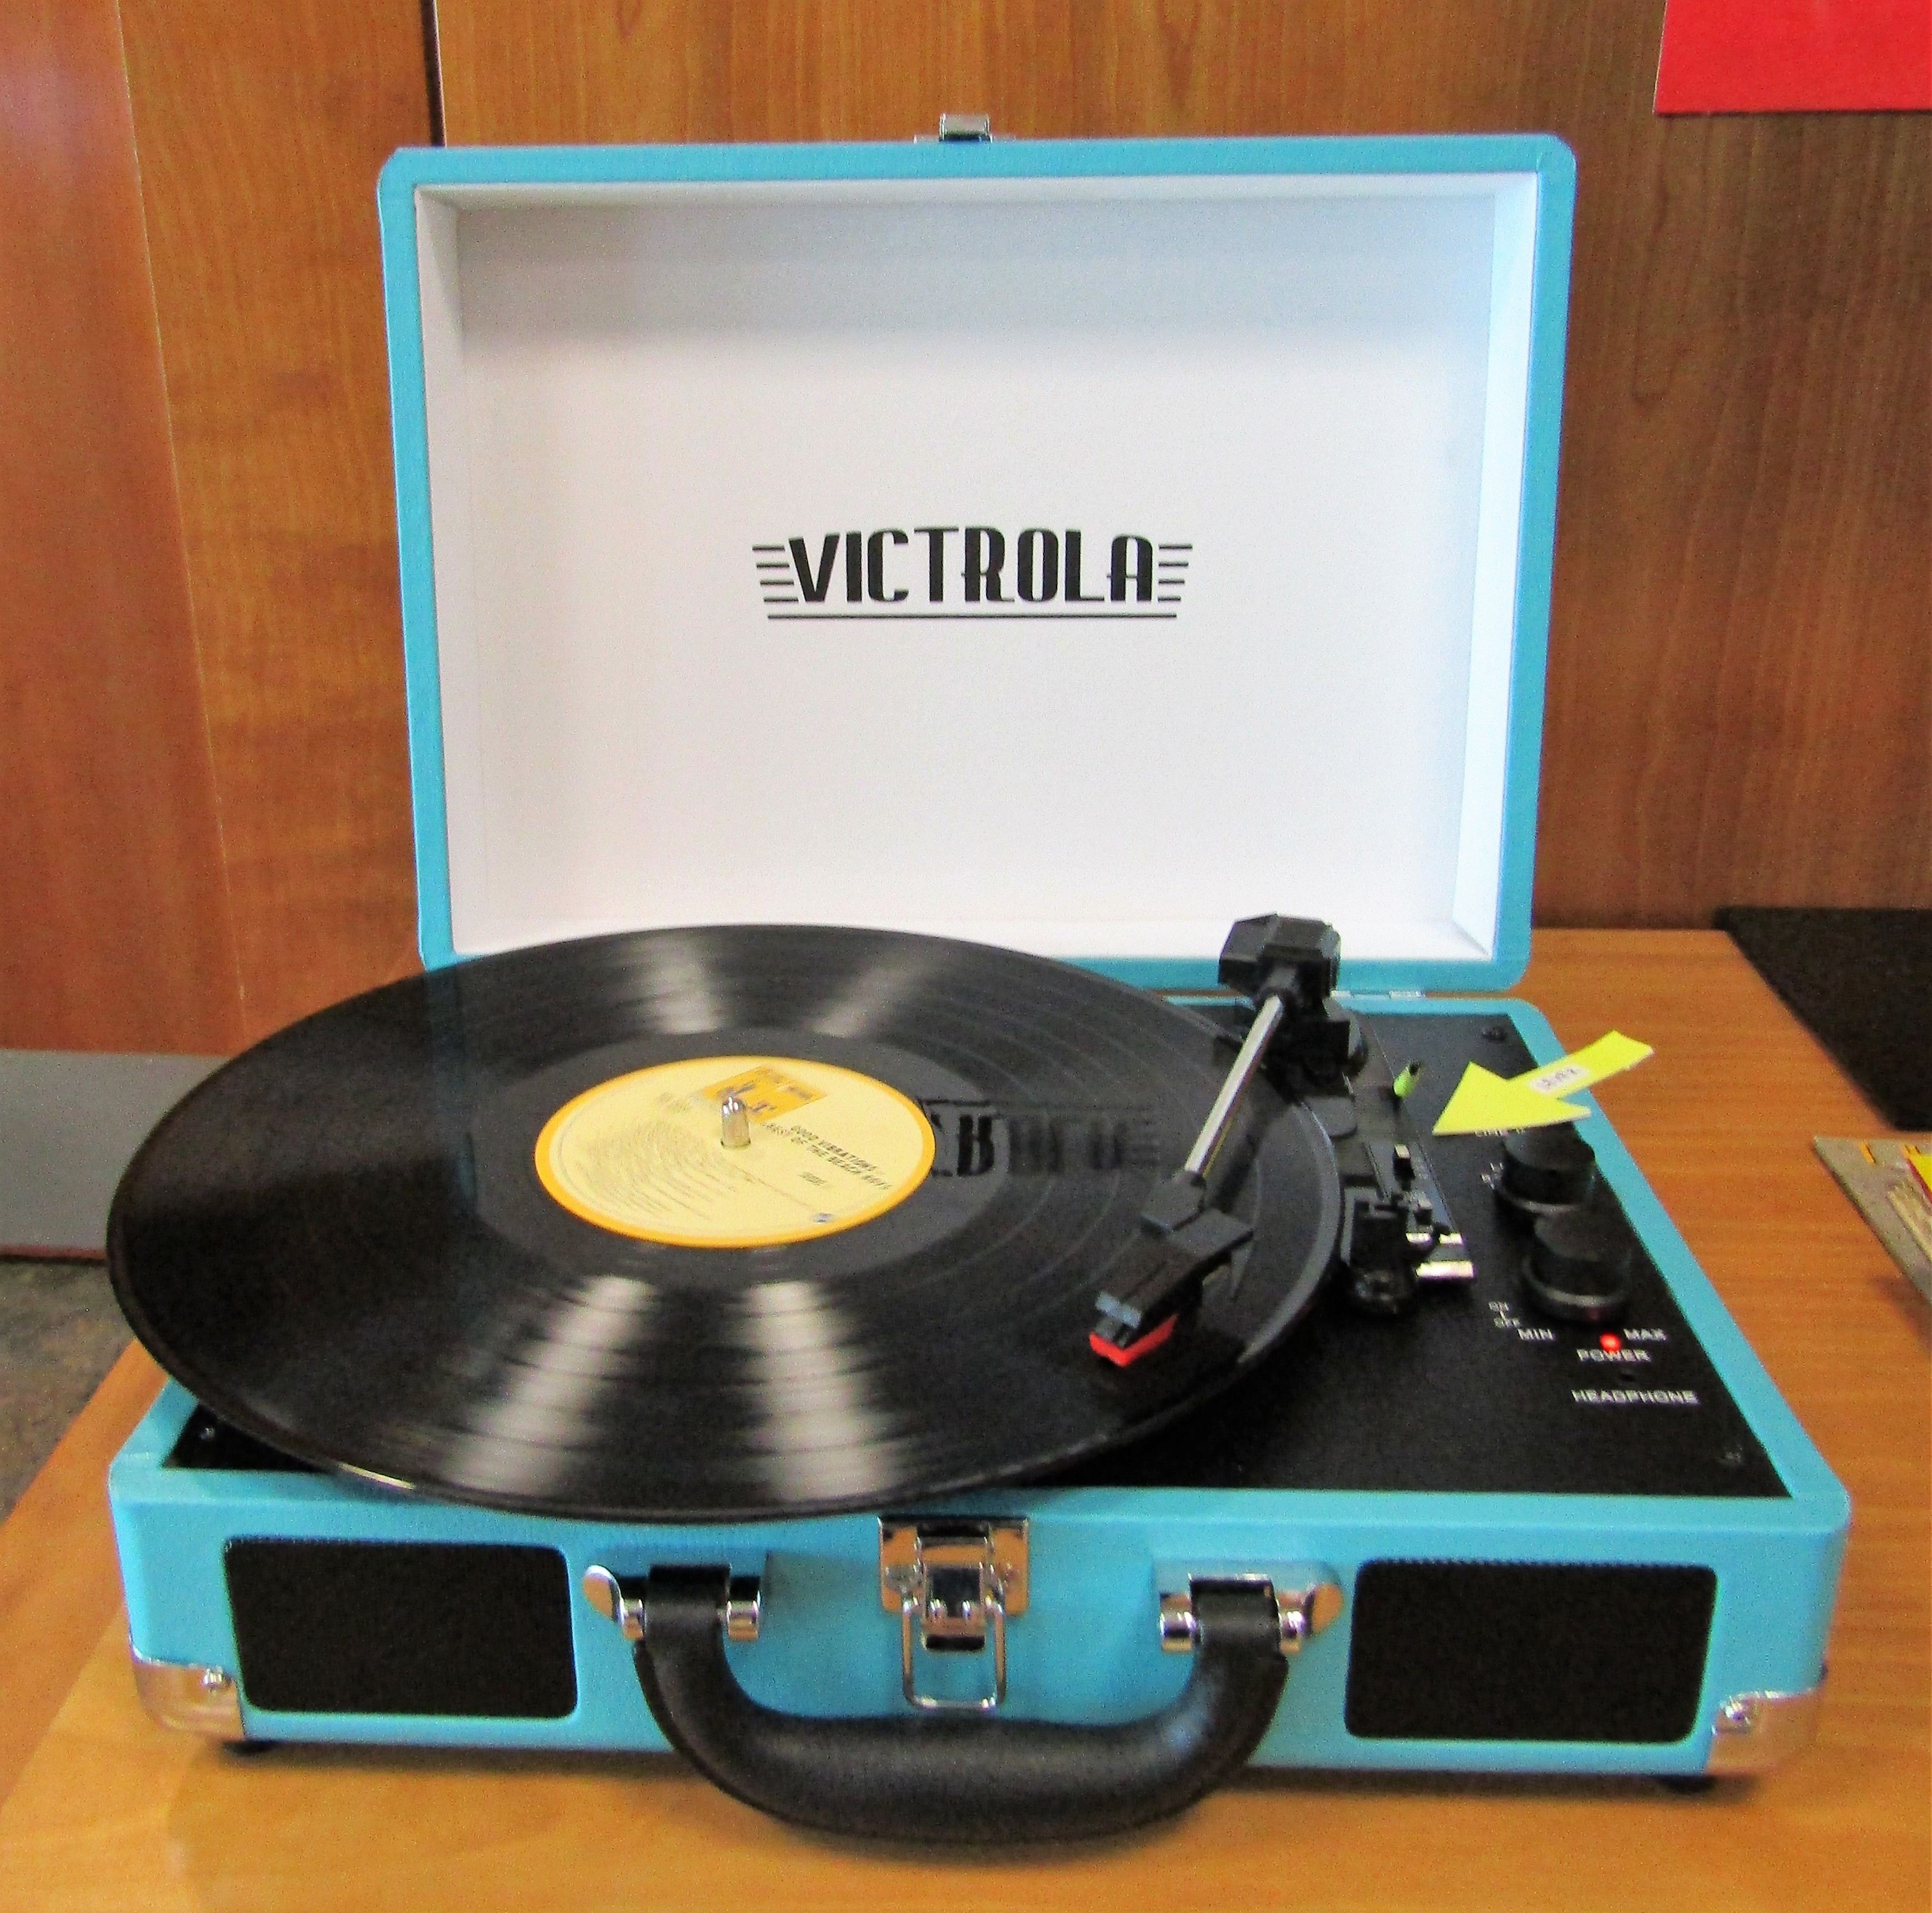 File:Victrola record player (41039492255).jpg - Wikimedia Commons